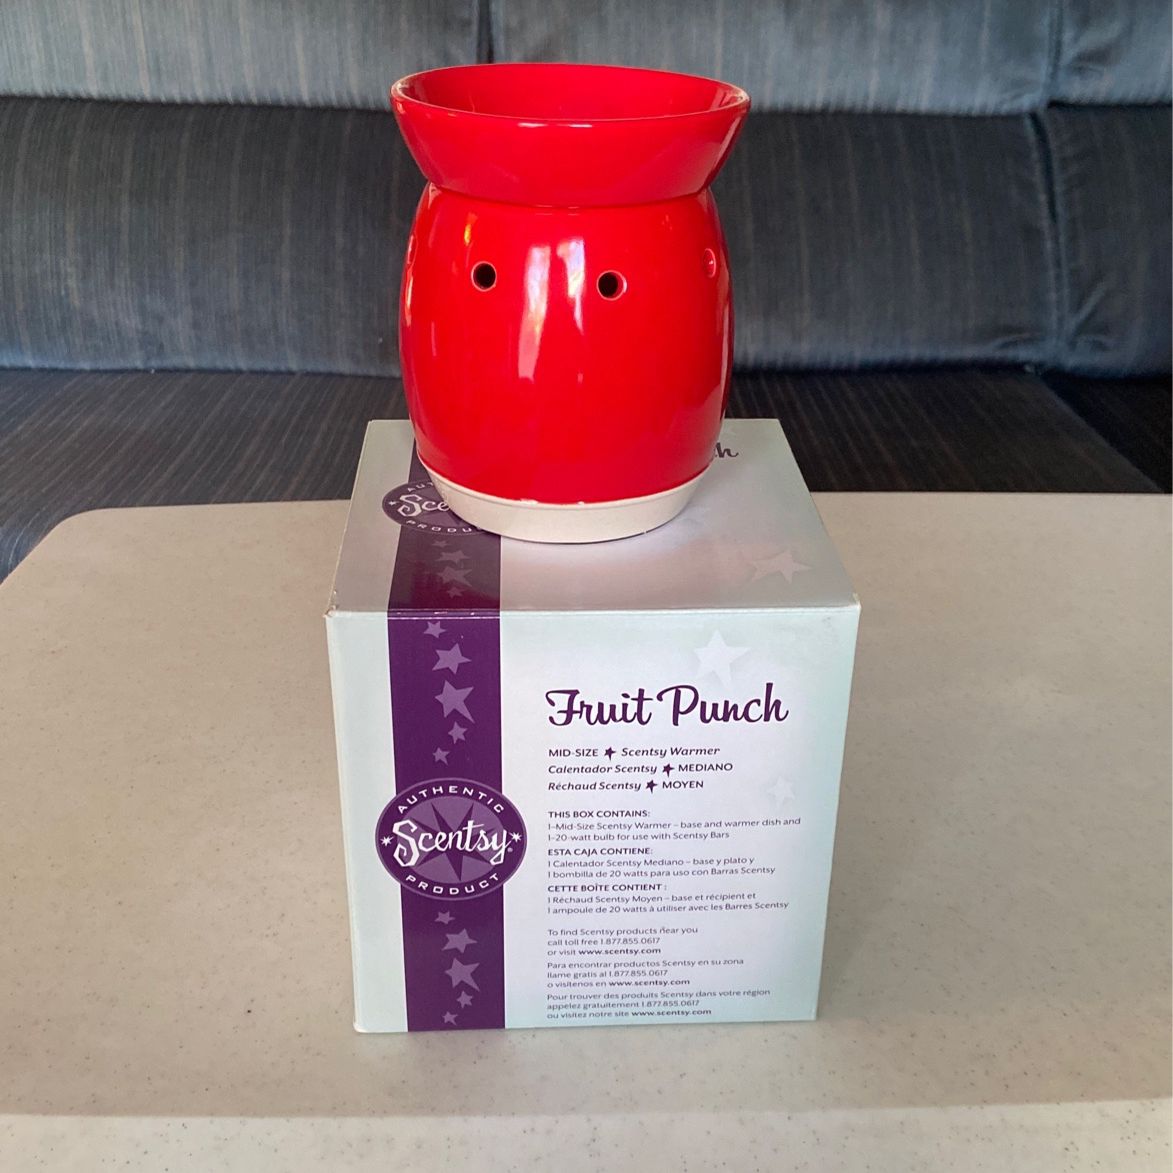 New “Fruit Punch” Scentsy Warmer